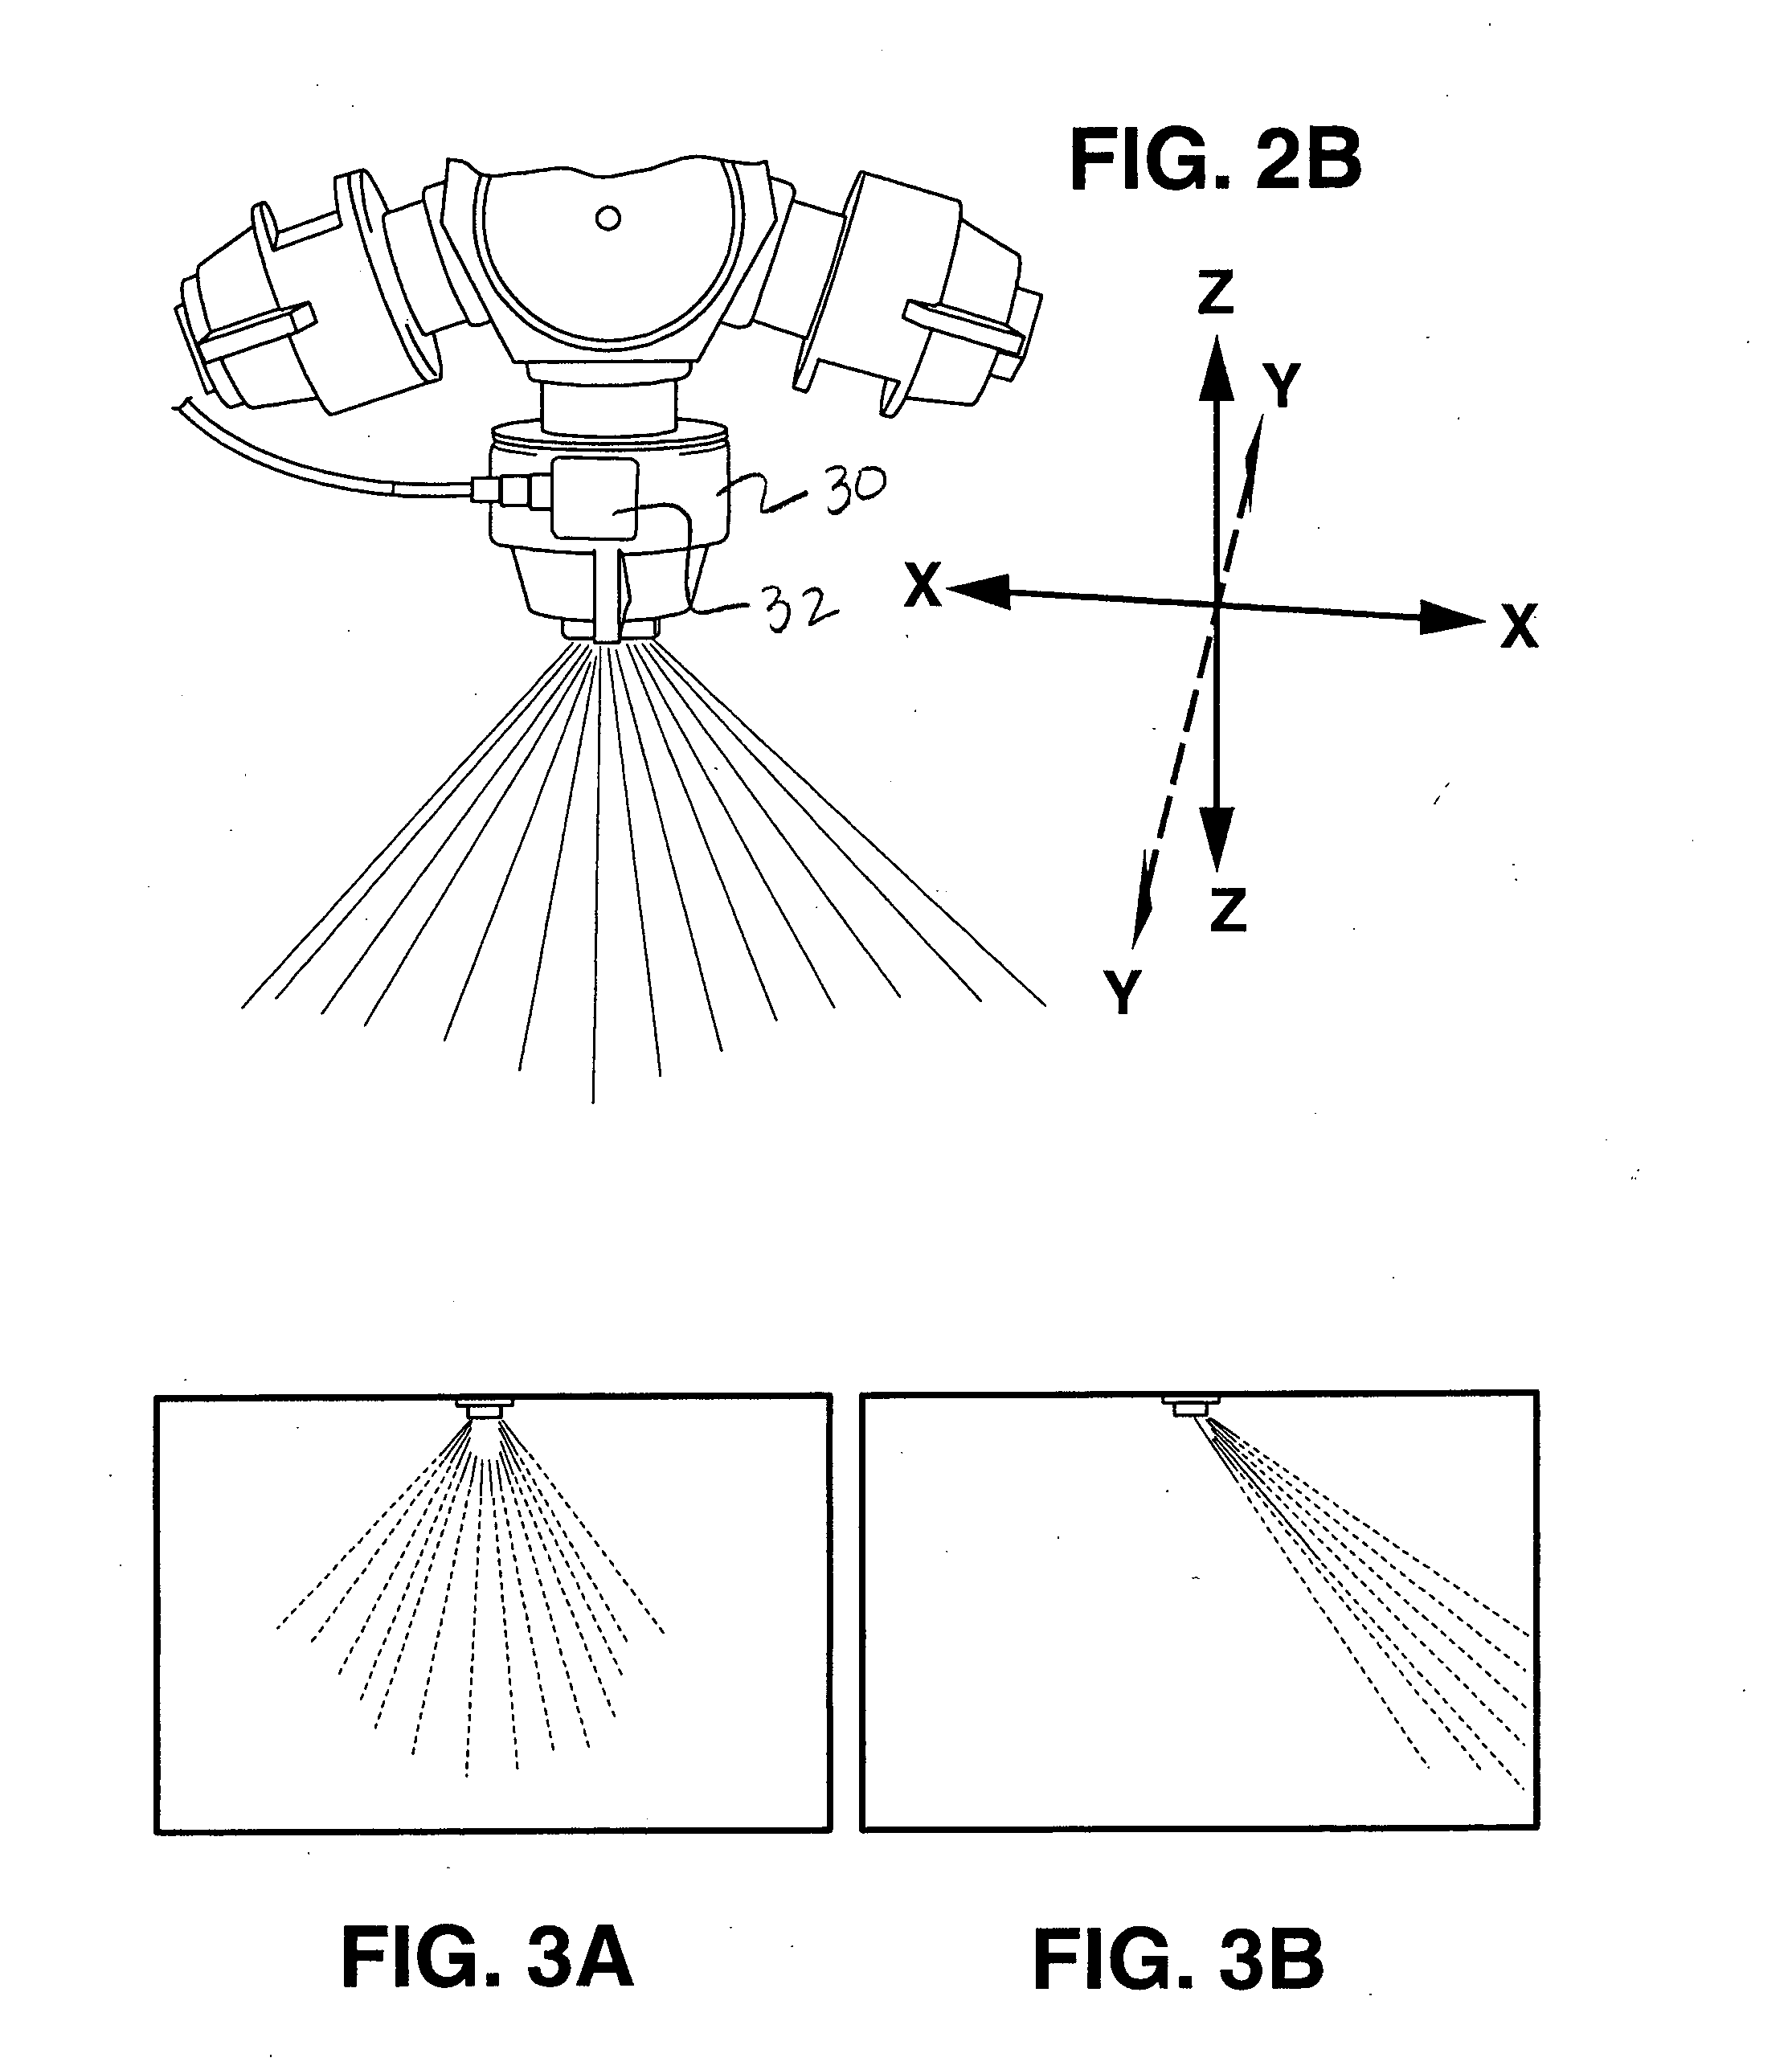 Flow control and operation monitoring system for individual spray nozzles